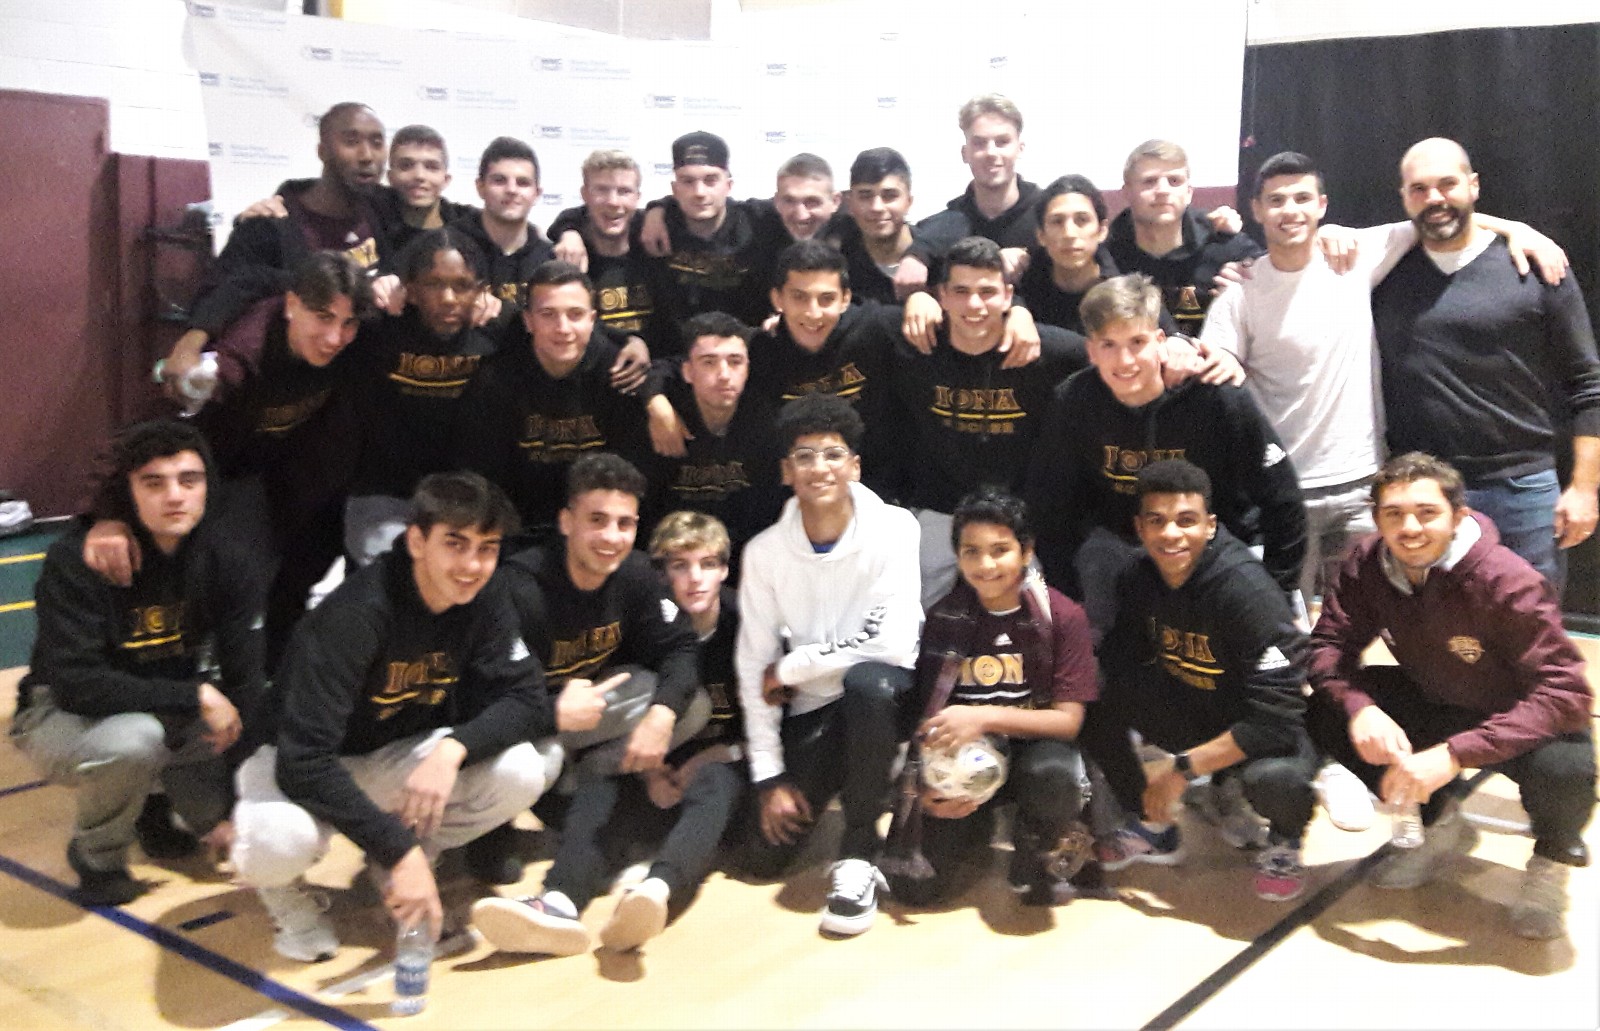 Kiran is pictured with the Iona College soccer team in 2019.